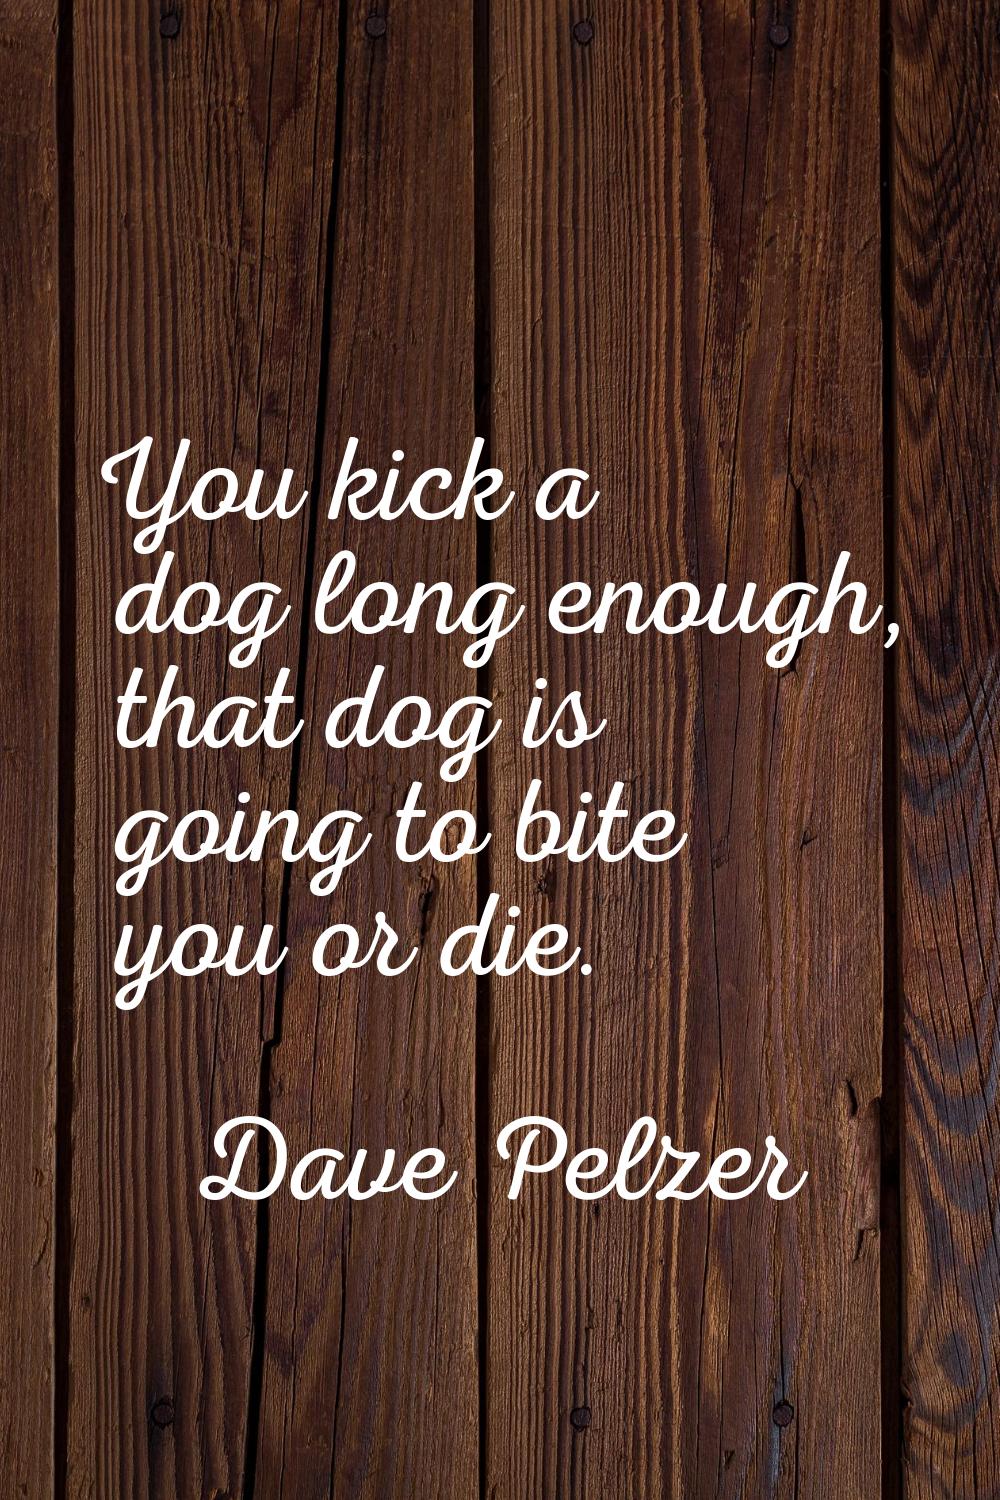 You kick a dog long enough, that dog is going to bite you or die.